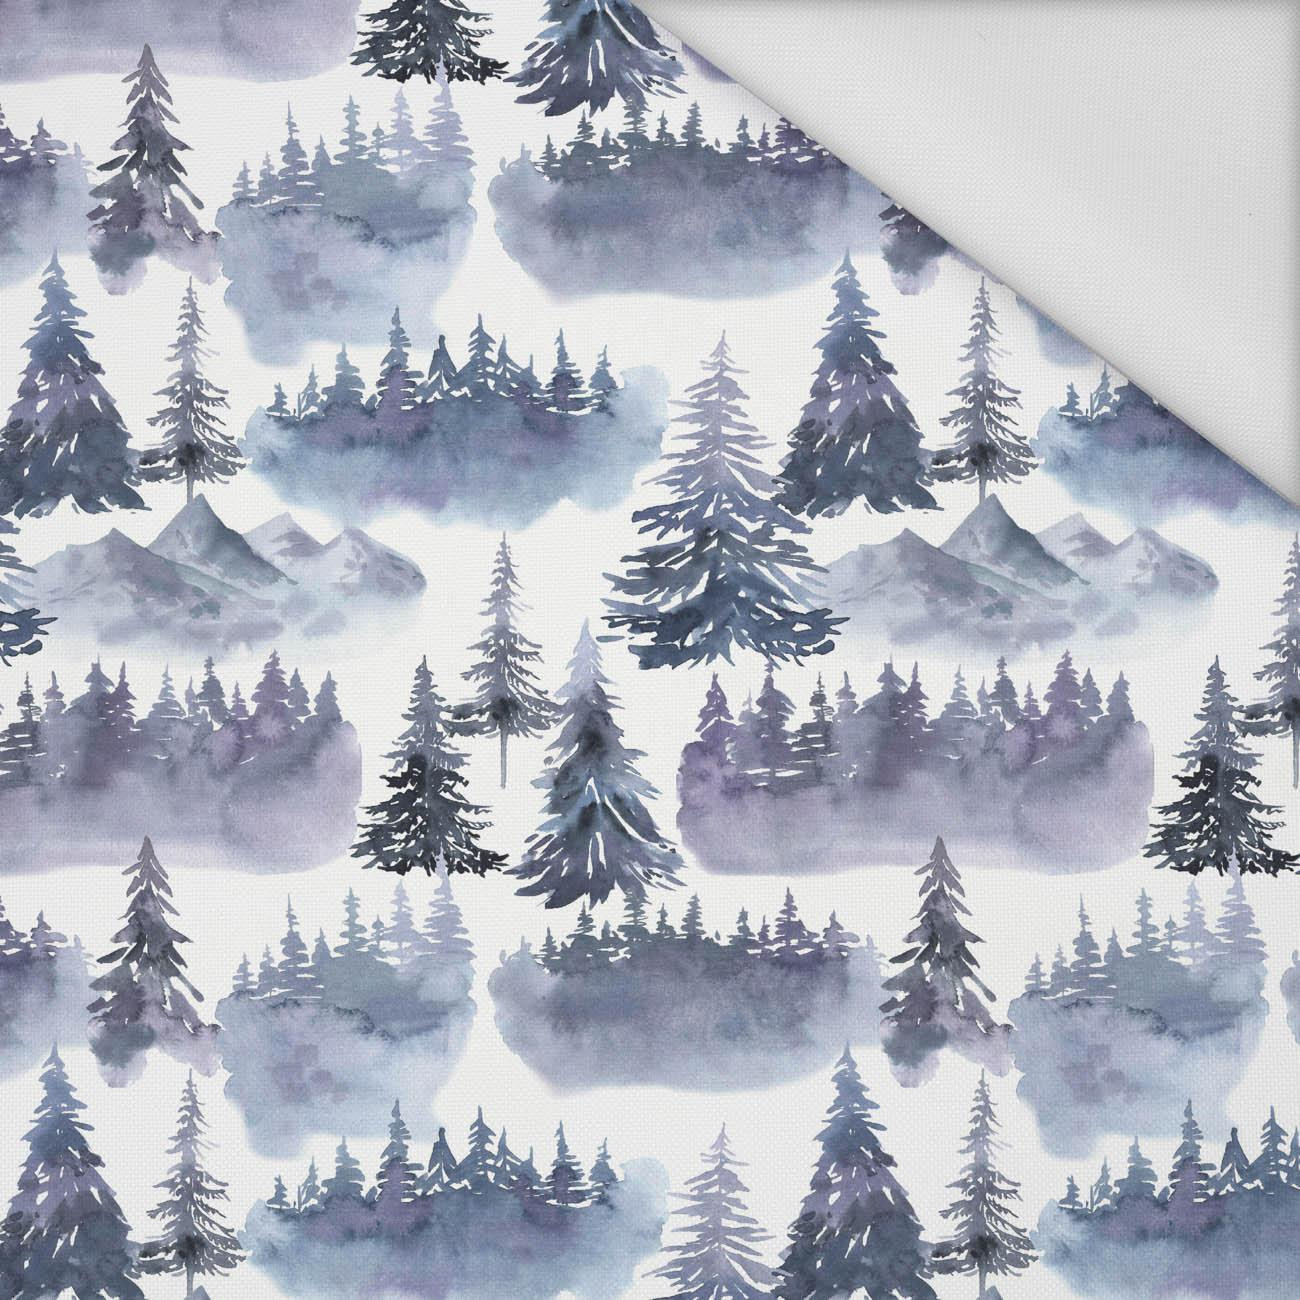 100cm FOREST LANDSCAPE (PAINTED FOREST) - Waterproof woven fabric